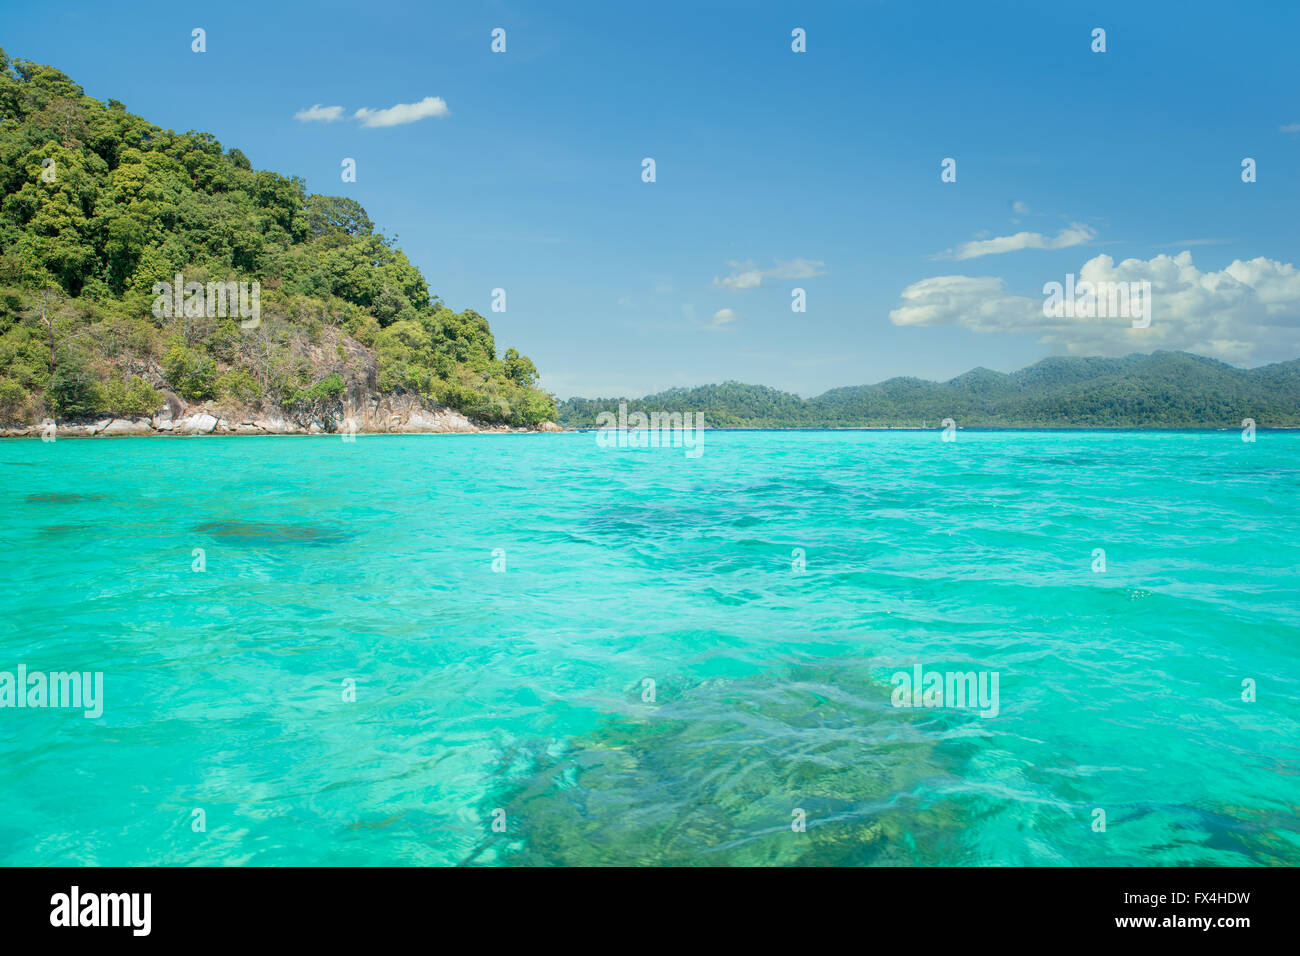 Summer, Travel, Vacation and Holiday concept - Idyllic Island Tranquil Bay in Phuket, Thailand Stock Photo